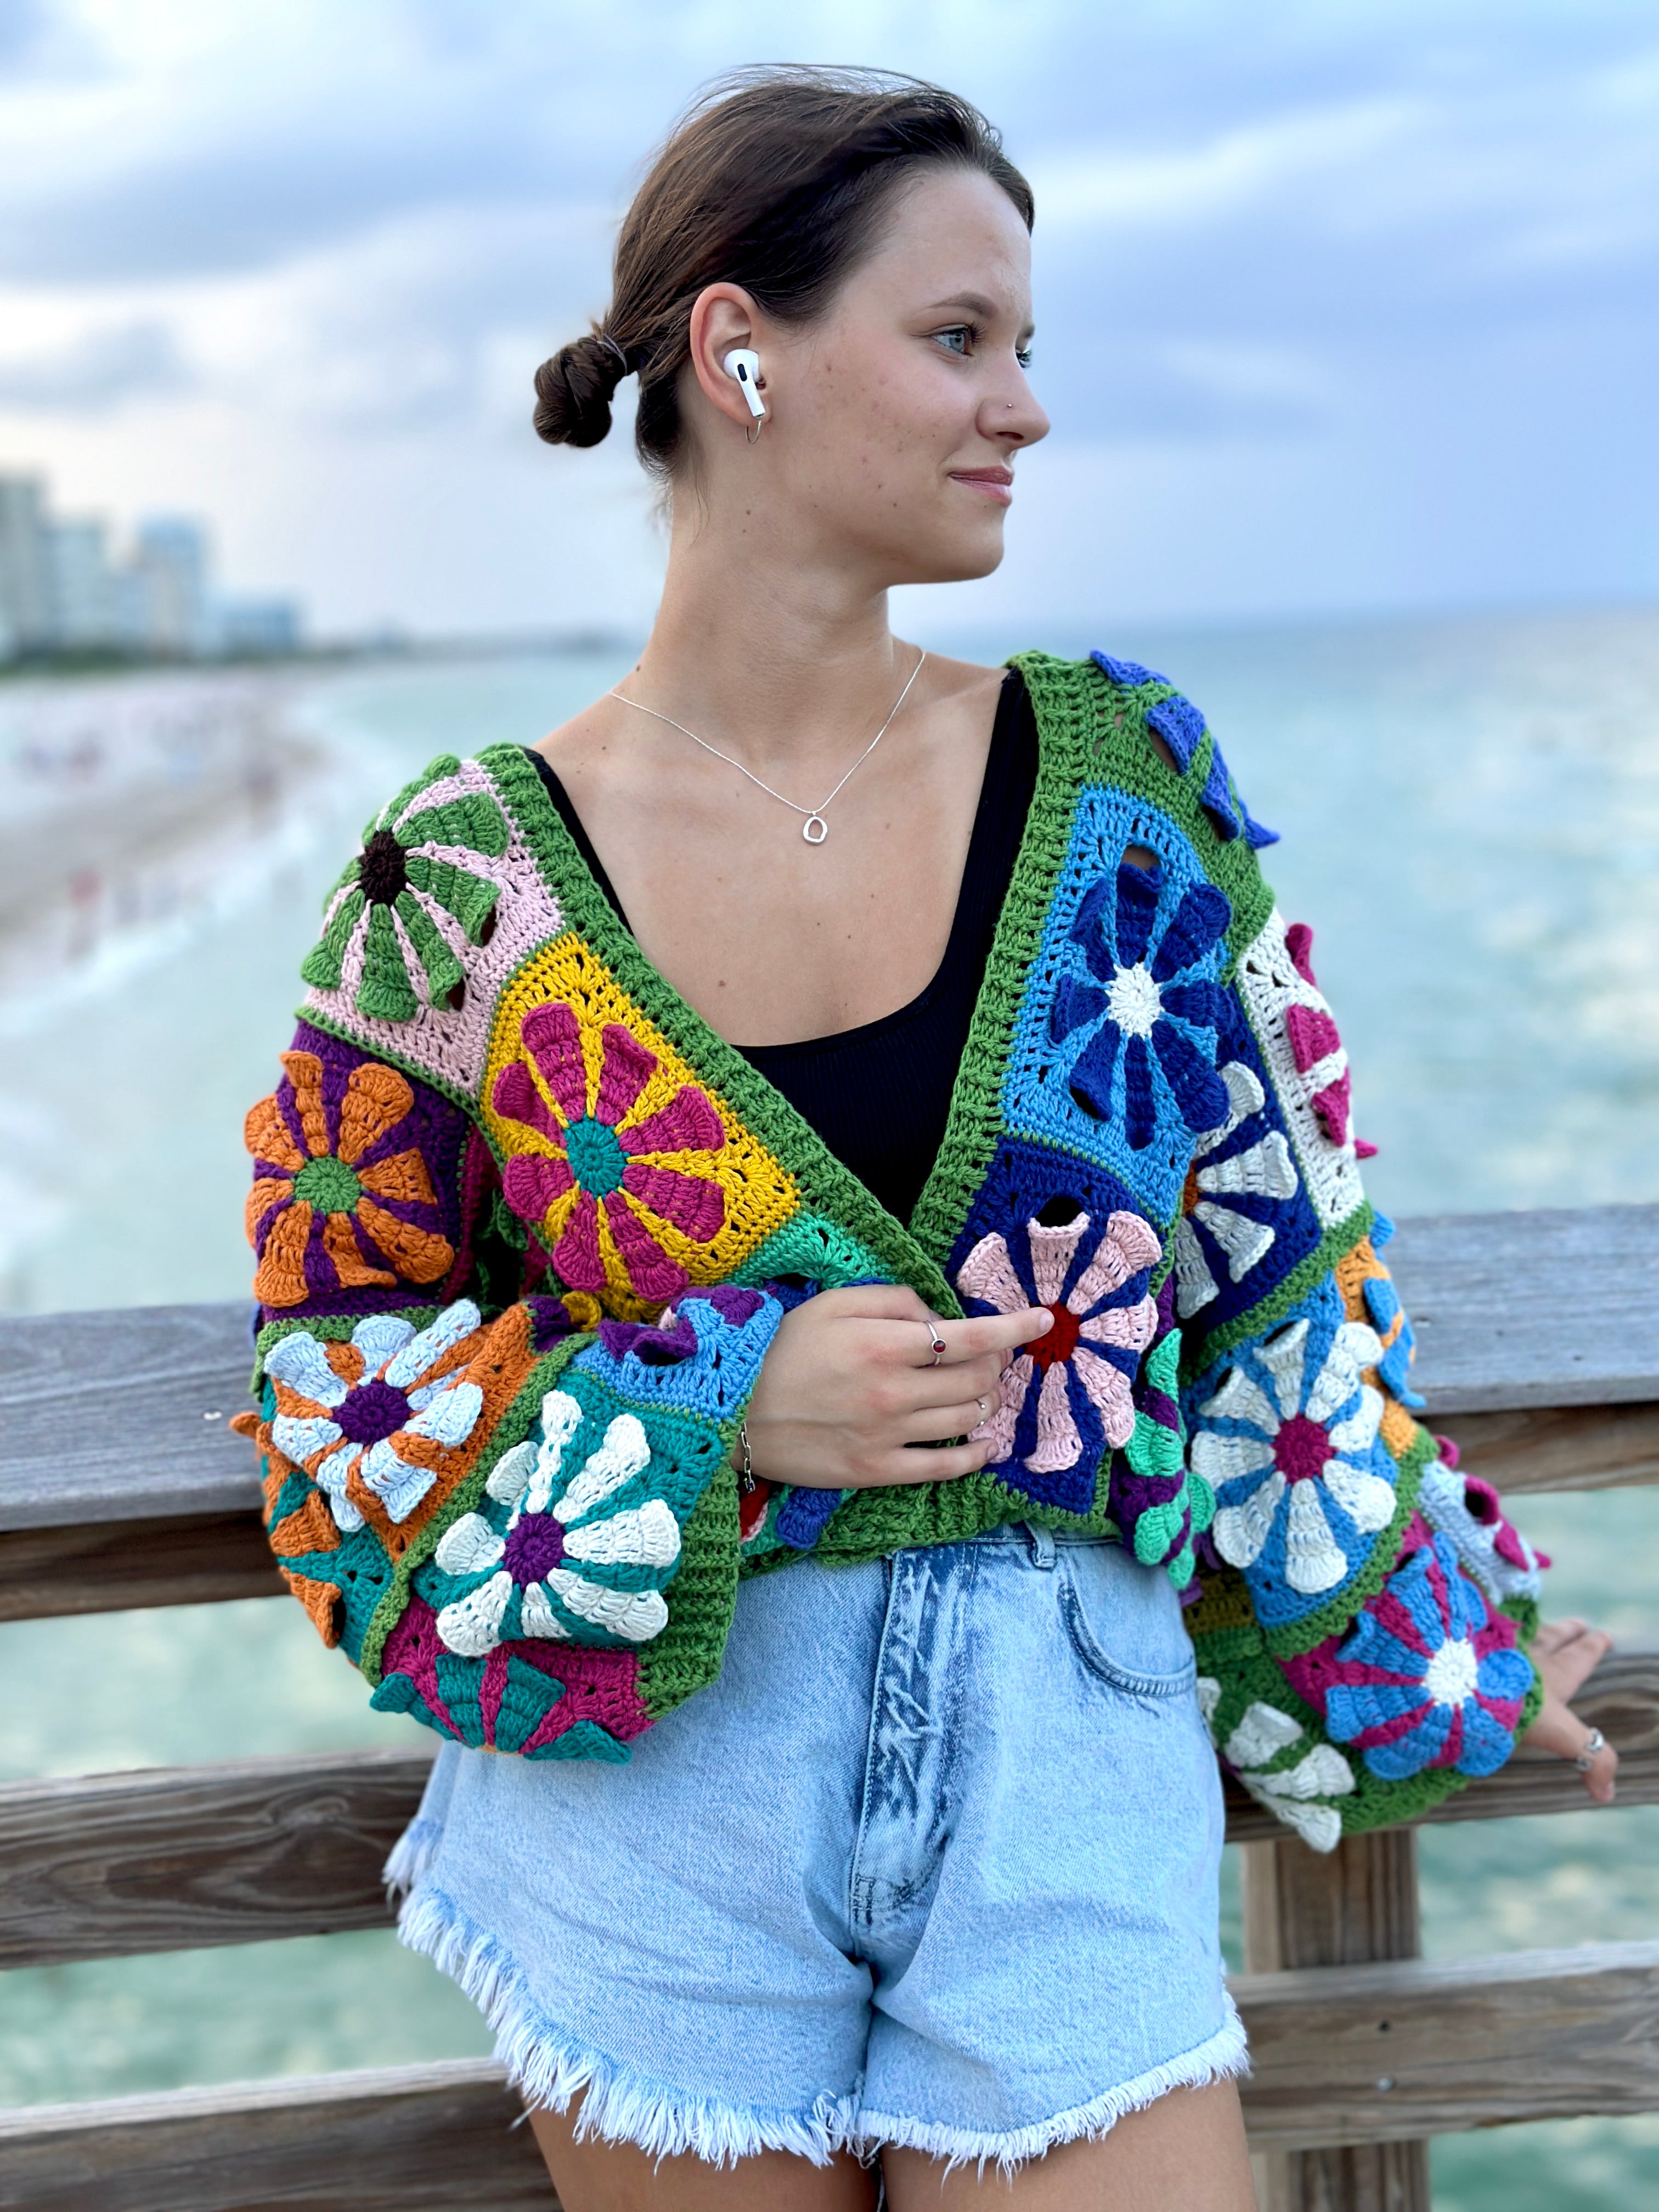 All 2022-2023 crochet patterns (instant download)